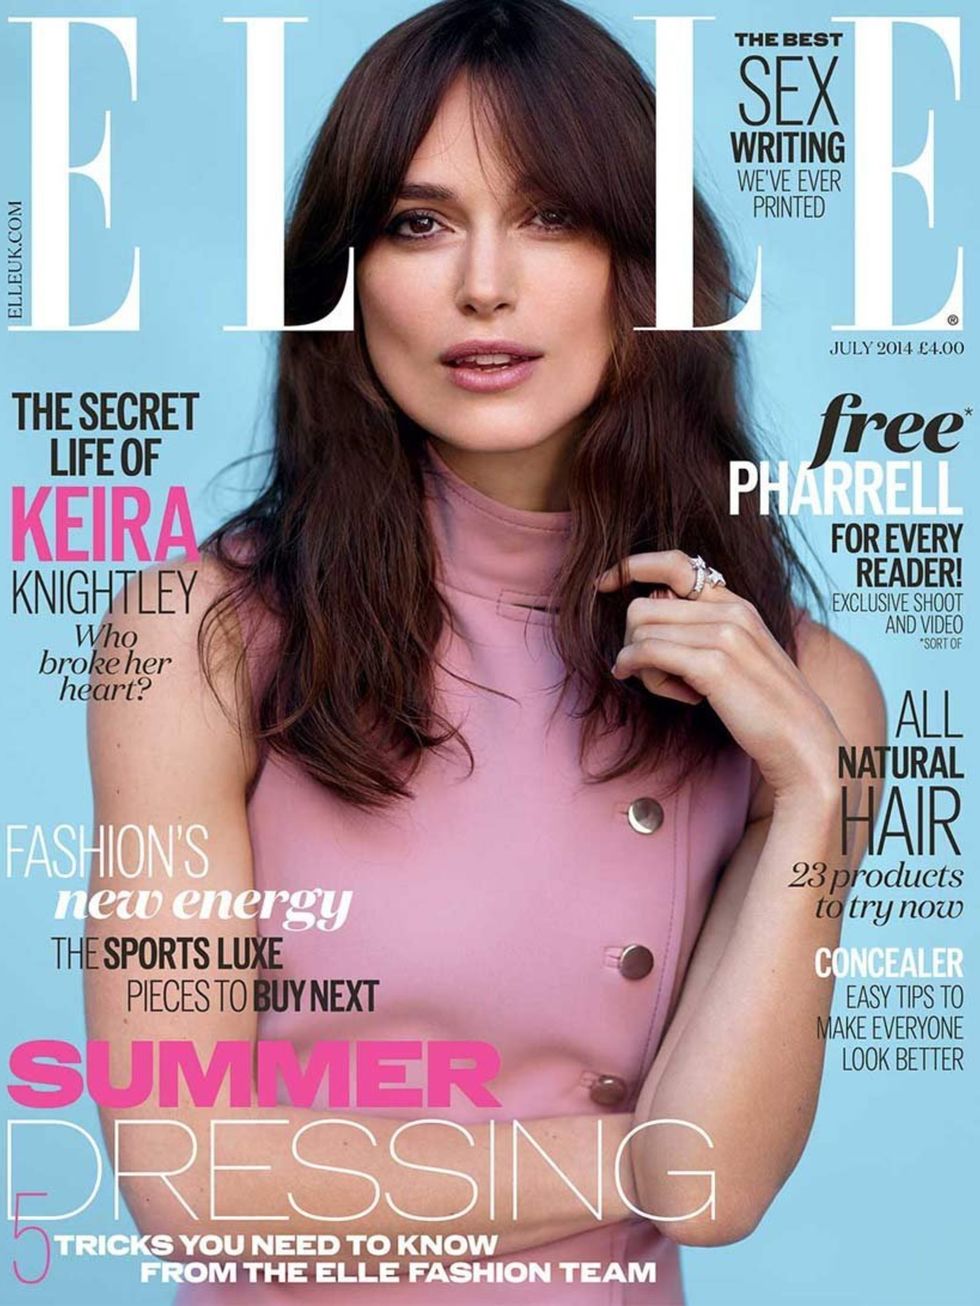 <p>Have you seen cover star Keira Knightley in our brand spanking new July issue? </p><p><em><a href="http://www.hearstmagazines.co.uk/elle/JES10068">Order your printed copy of ELLE</a></em></p><p><em><a href="http://www.hearstmagazines.co.uk/elle/VES1025